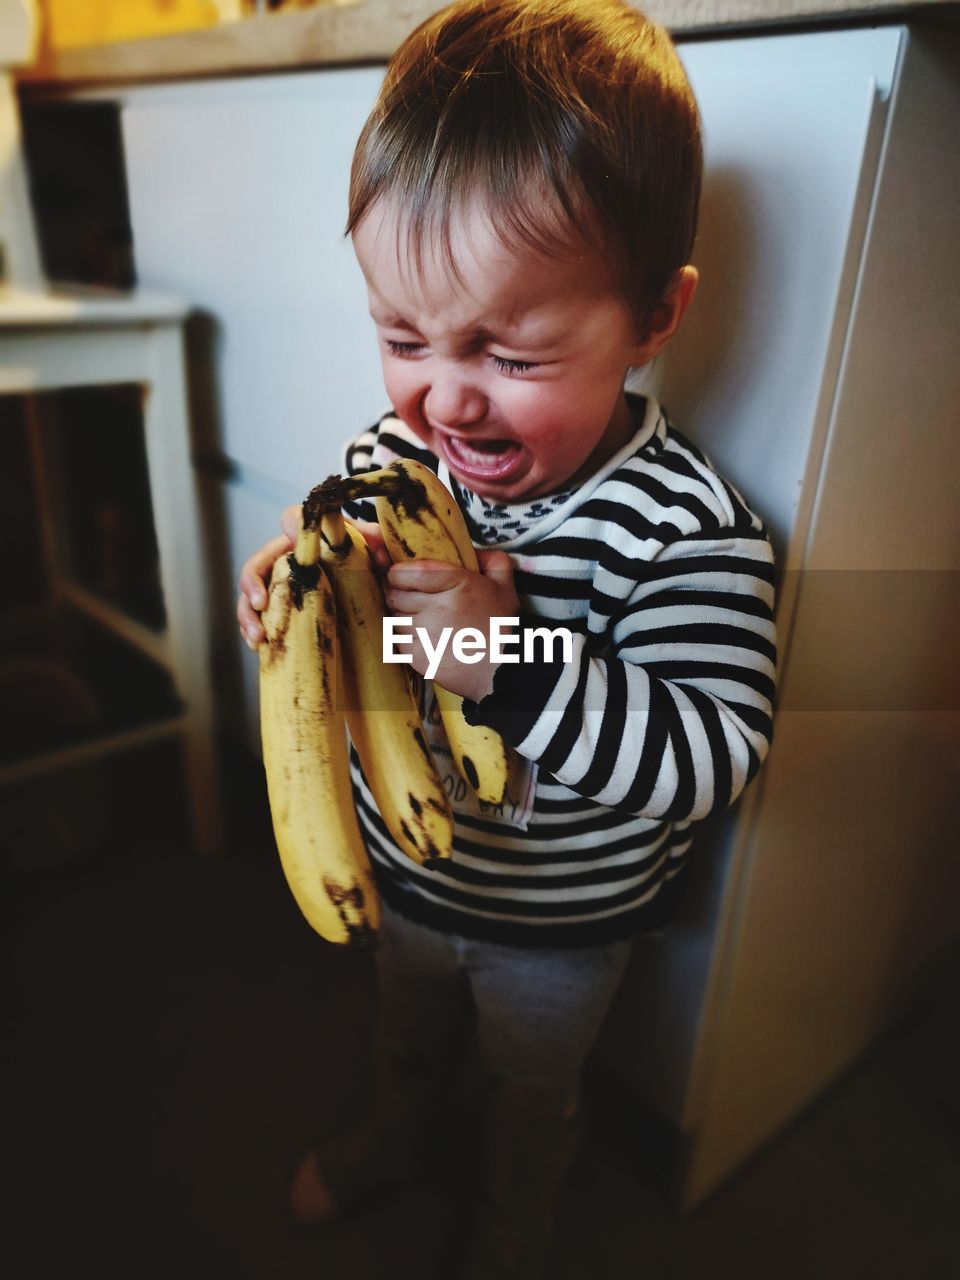 Cute girl with banana crying while standing in kitchen